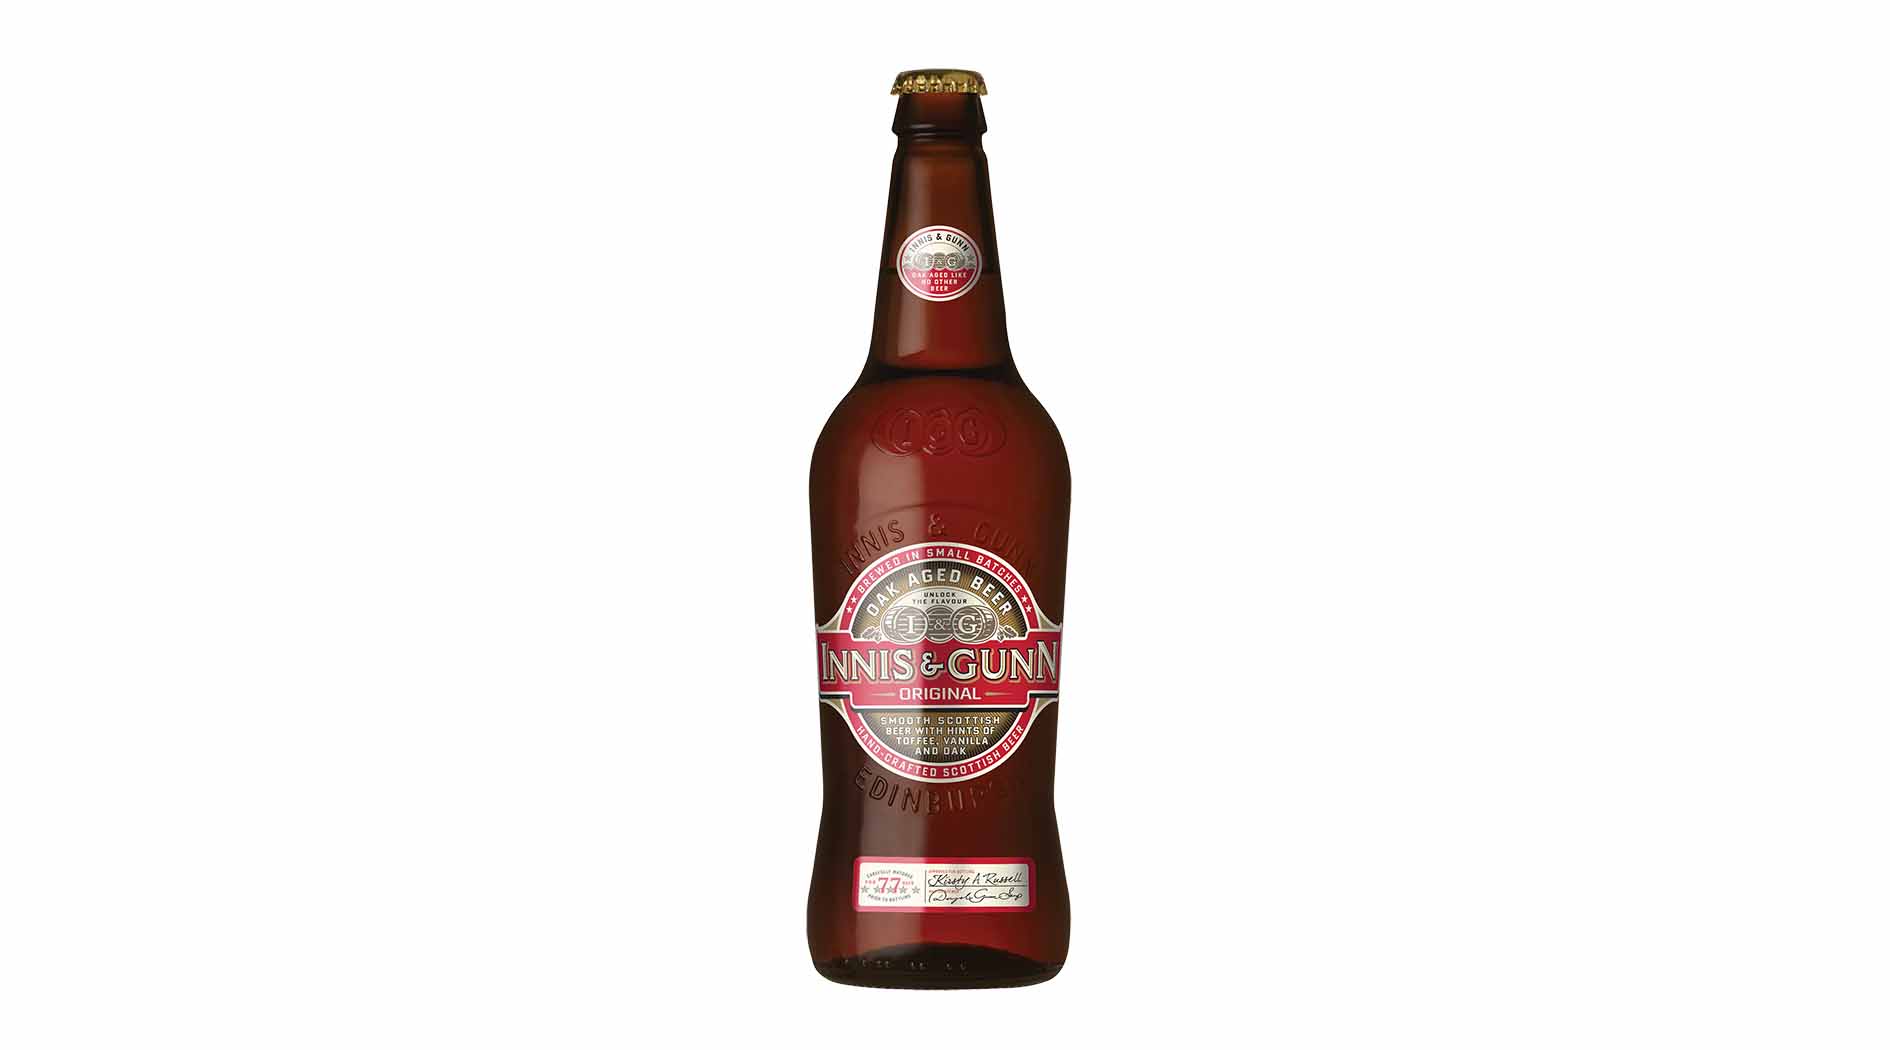 Barry & Fitzwilliam has secured the Irish distribution rights to the iconic craft beer brand Innis & Gunn.